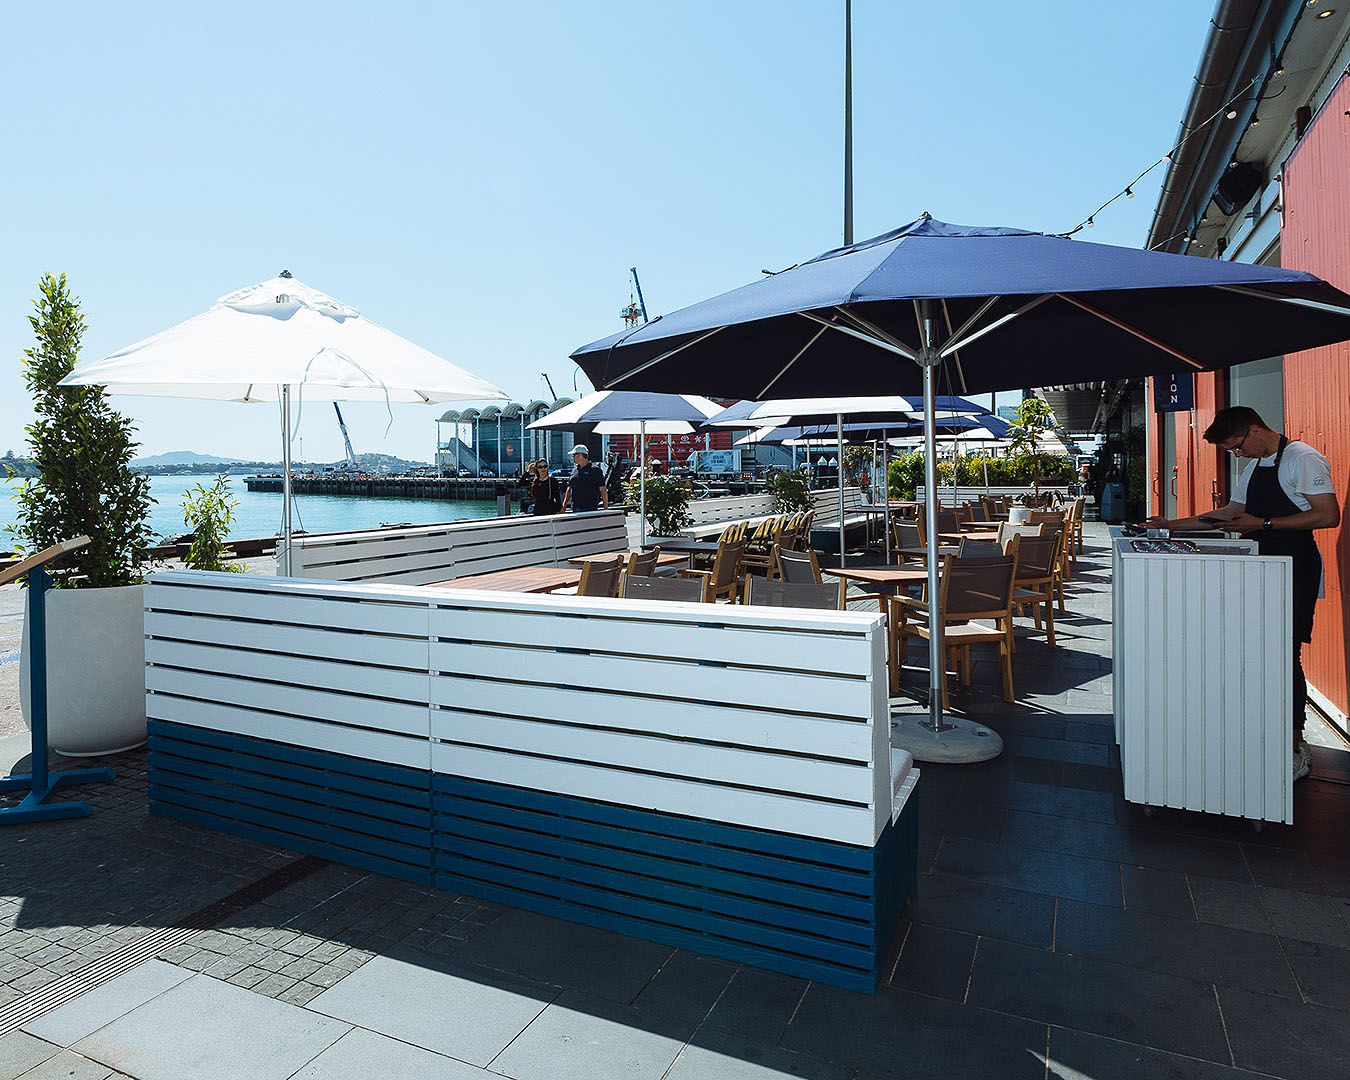 The exterior of Wynyard Pavilion, one of the best waterfront restaurants and bars in Auckland.